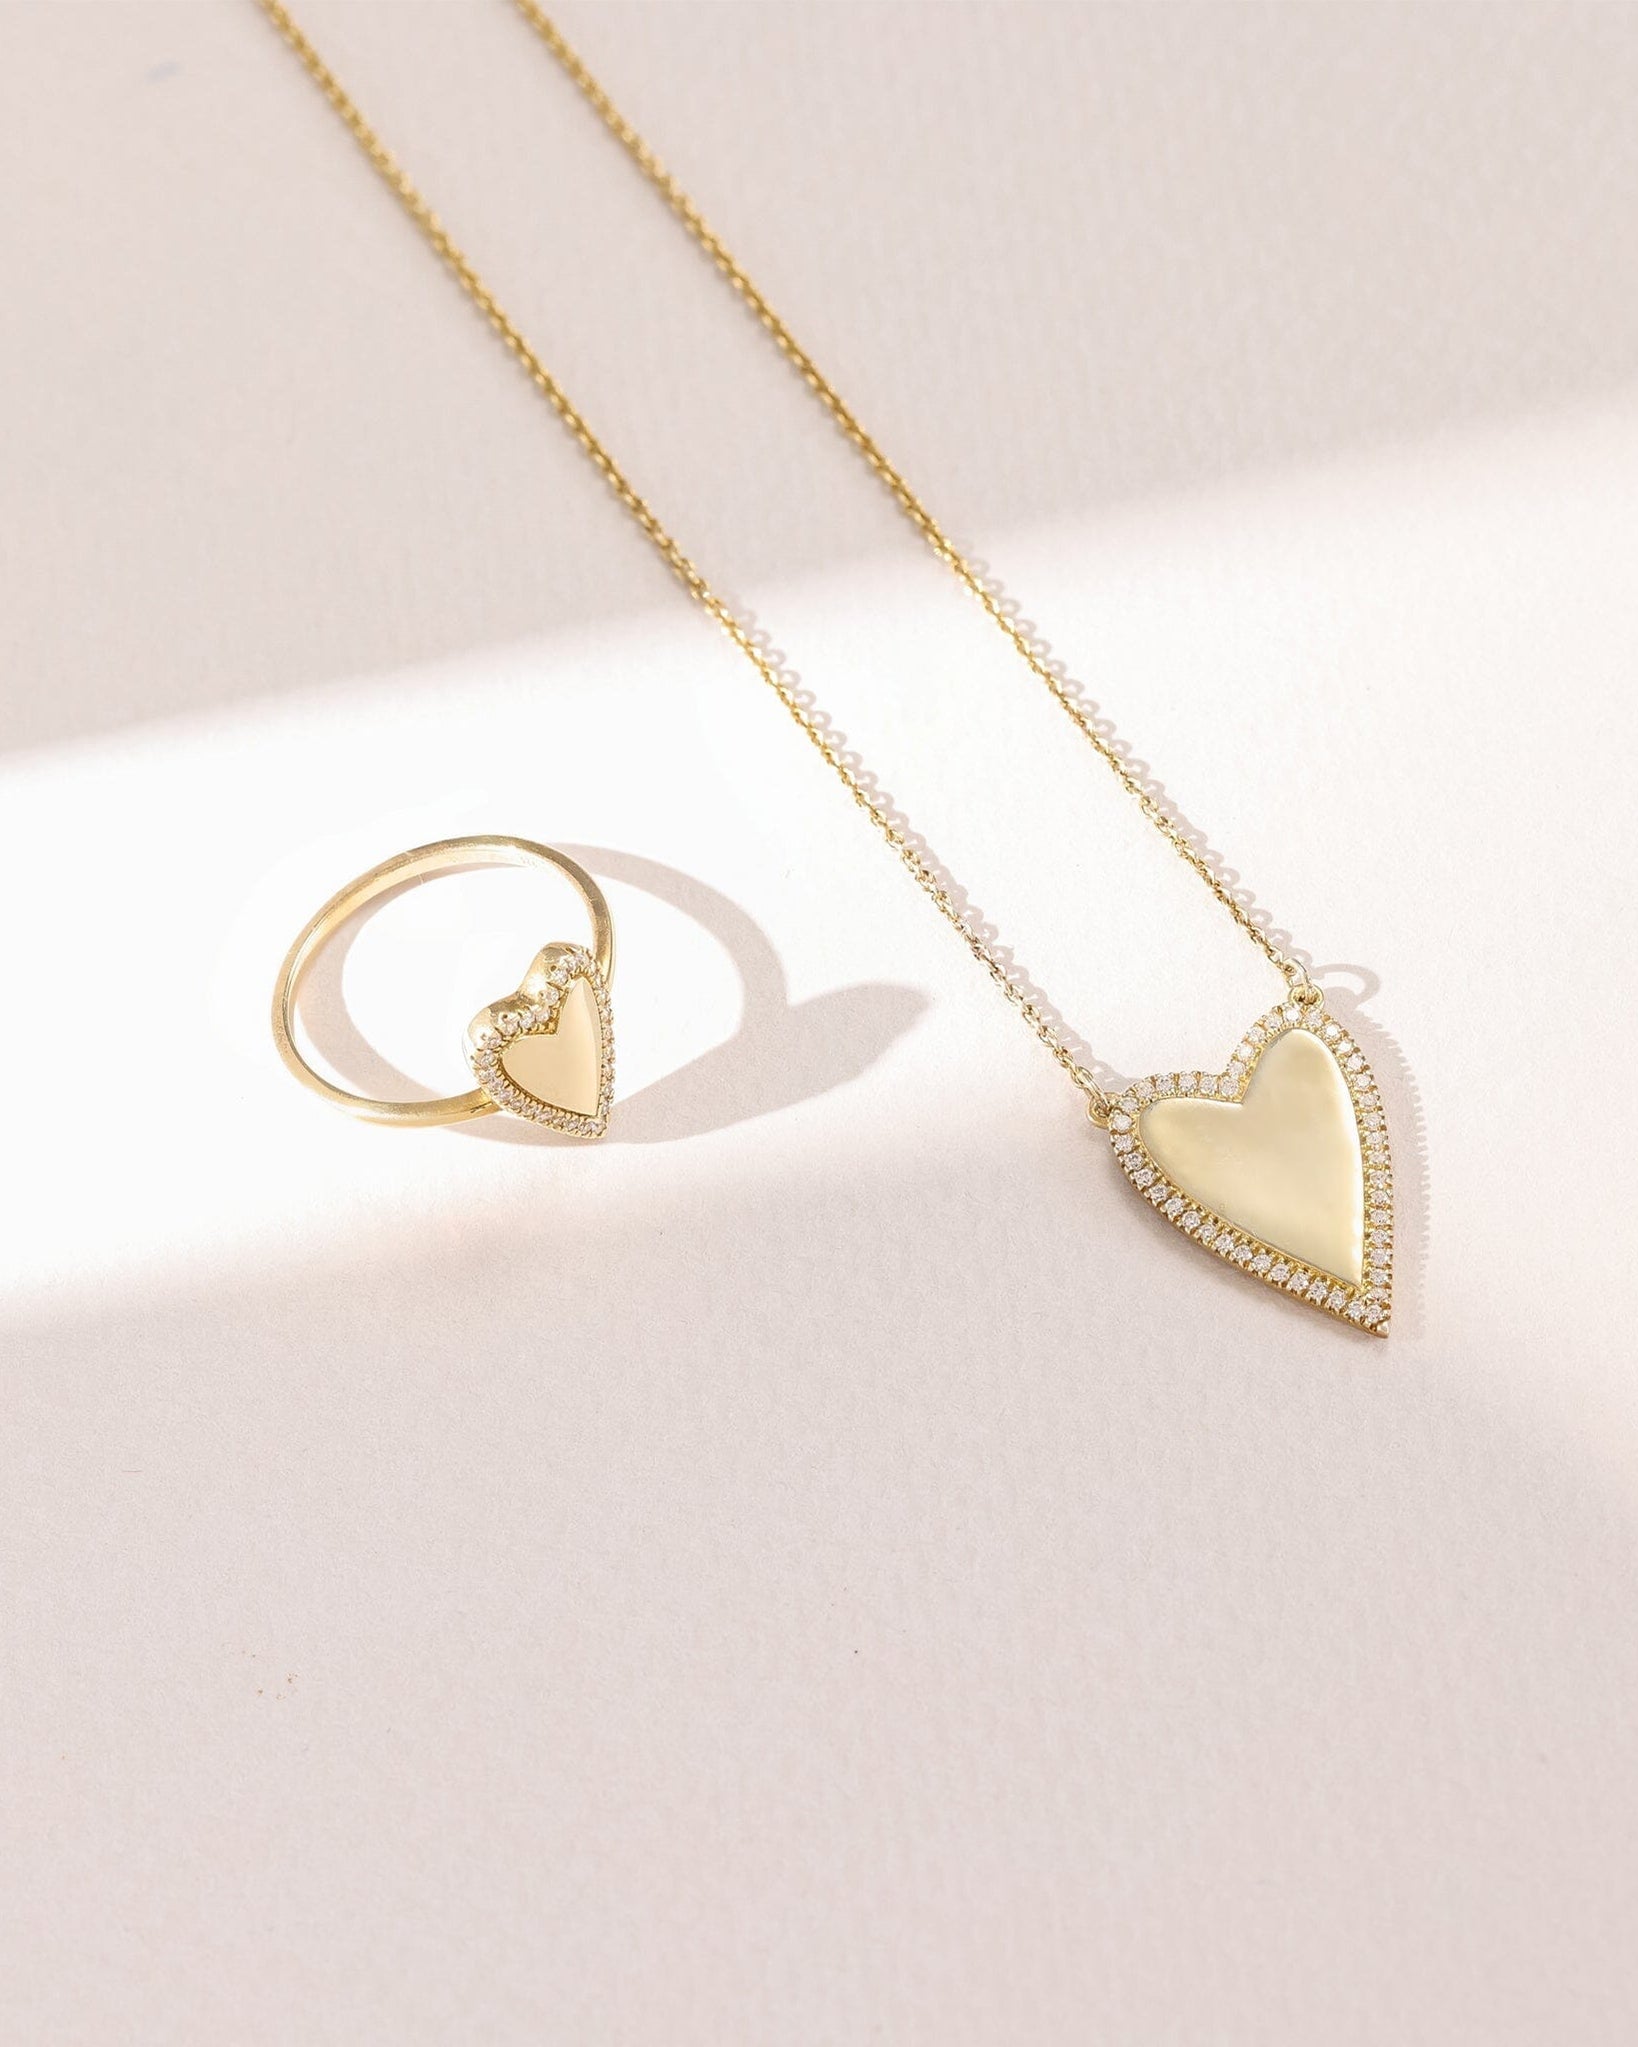 Outlined Heart Diamond Necklace - 14K Yellow Gold Necklaces magal-dev 